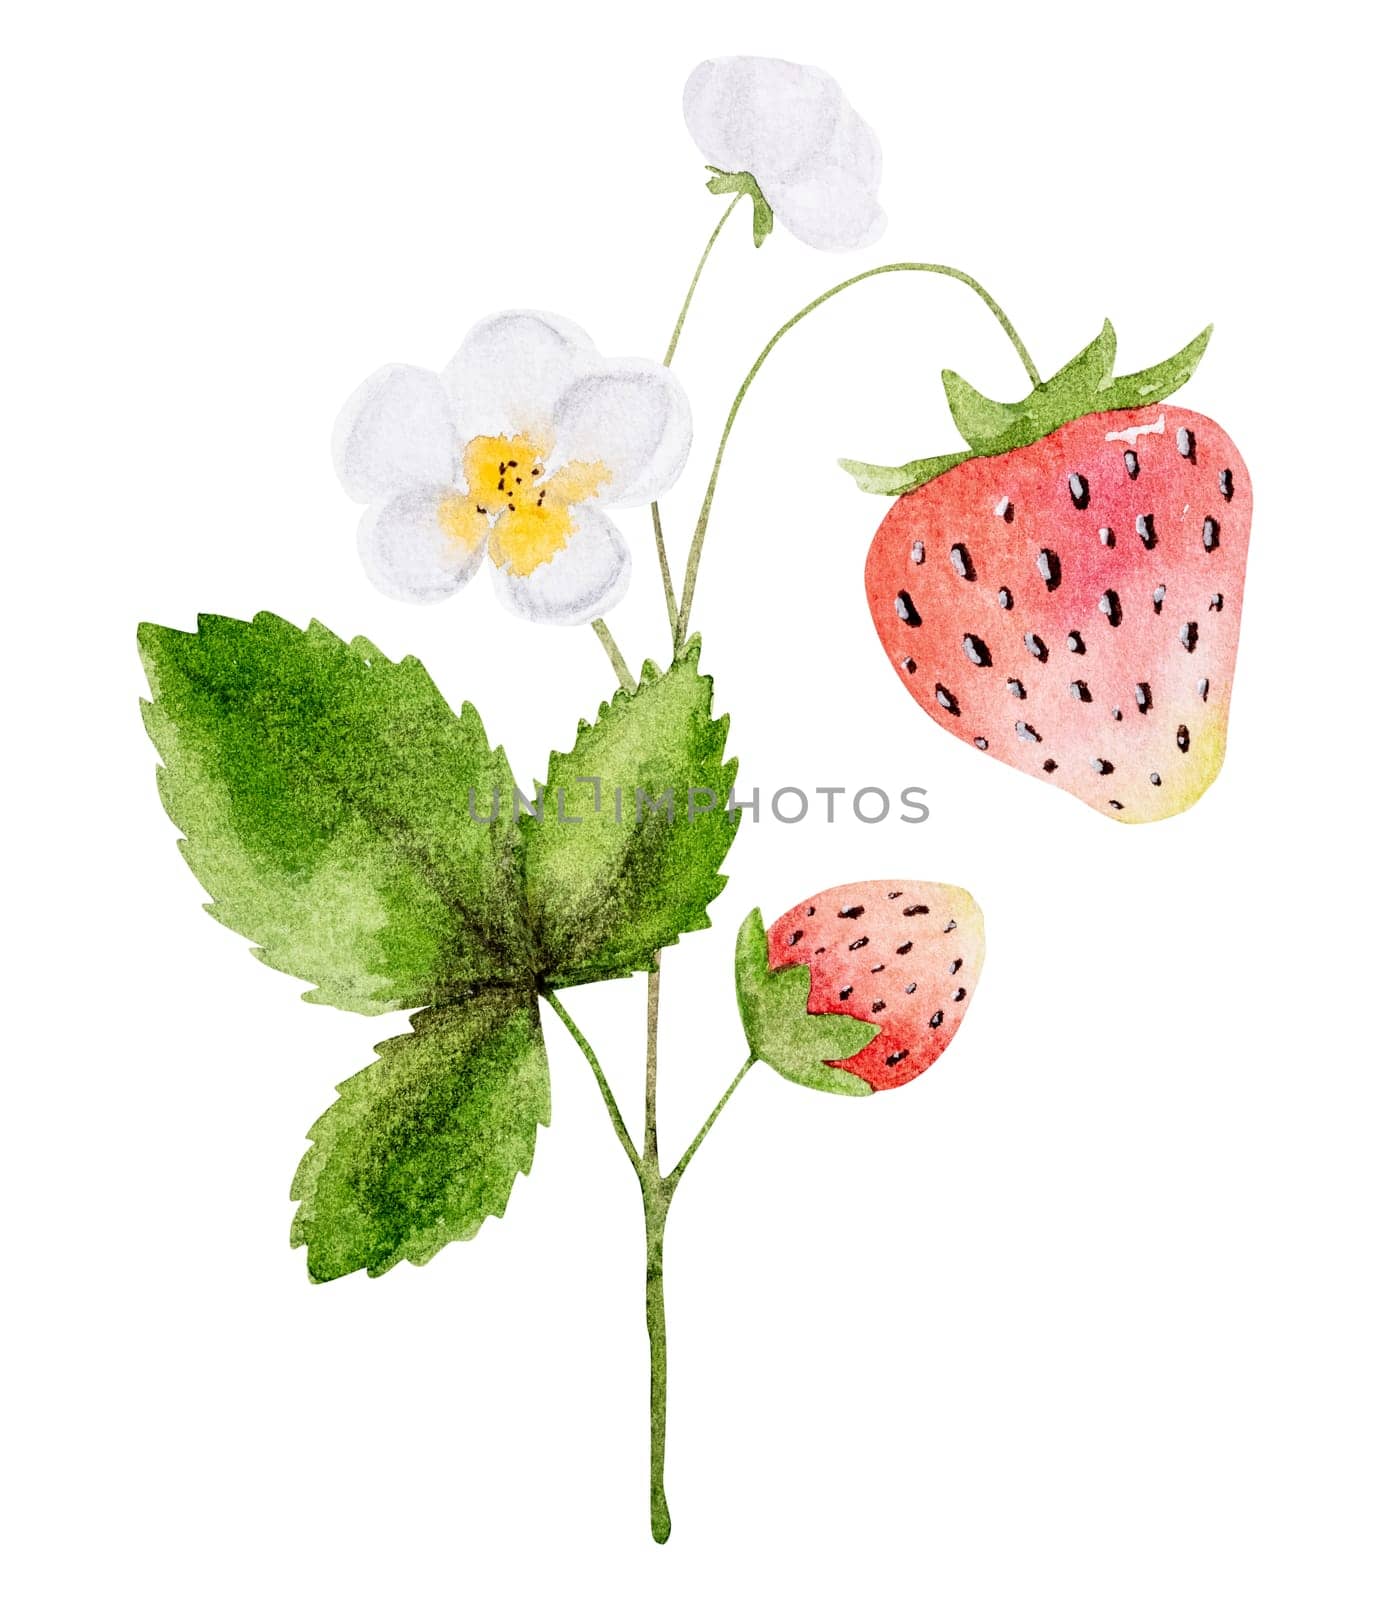 Hand-Drawn Watercolor Illustration Of Strawberry Branch With Flowers And Berries by tan4ikk1